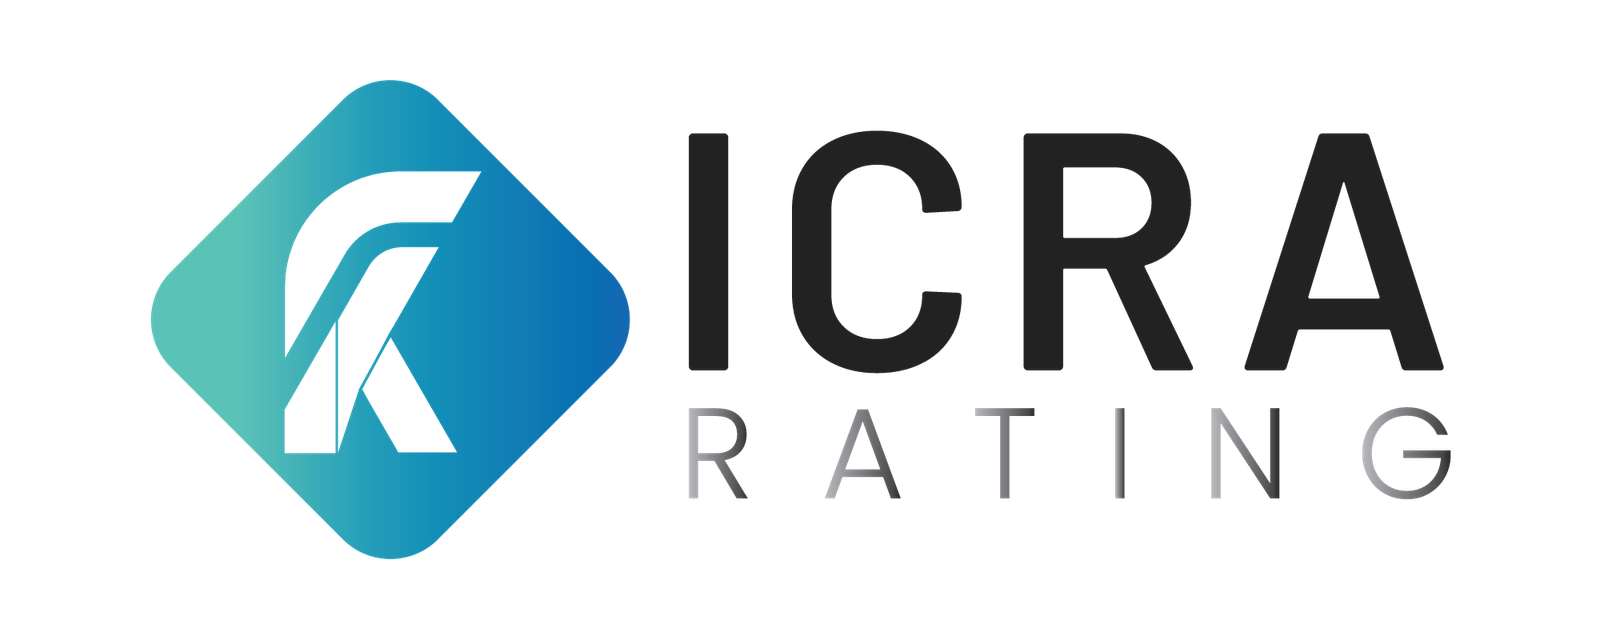 ICRA - Your Trusted Credit Rating Agency